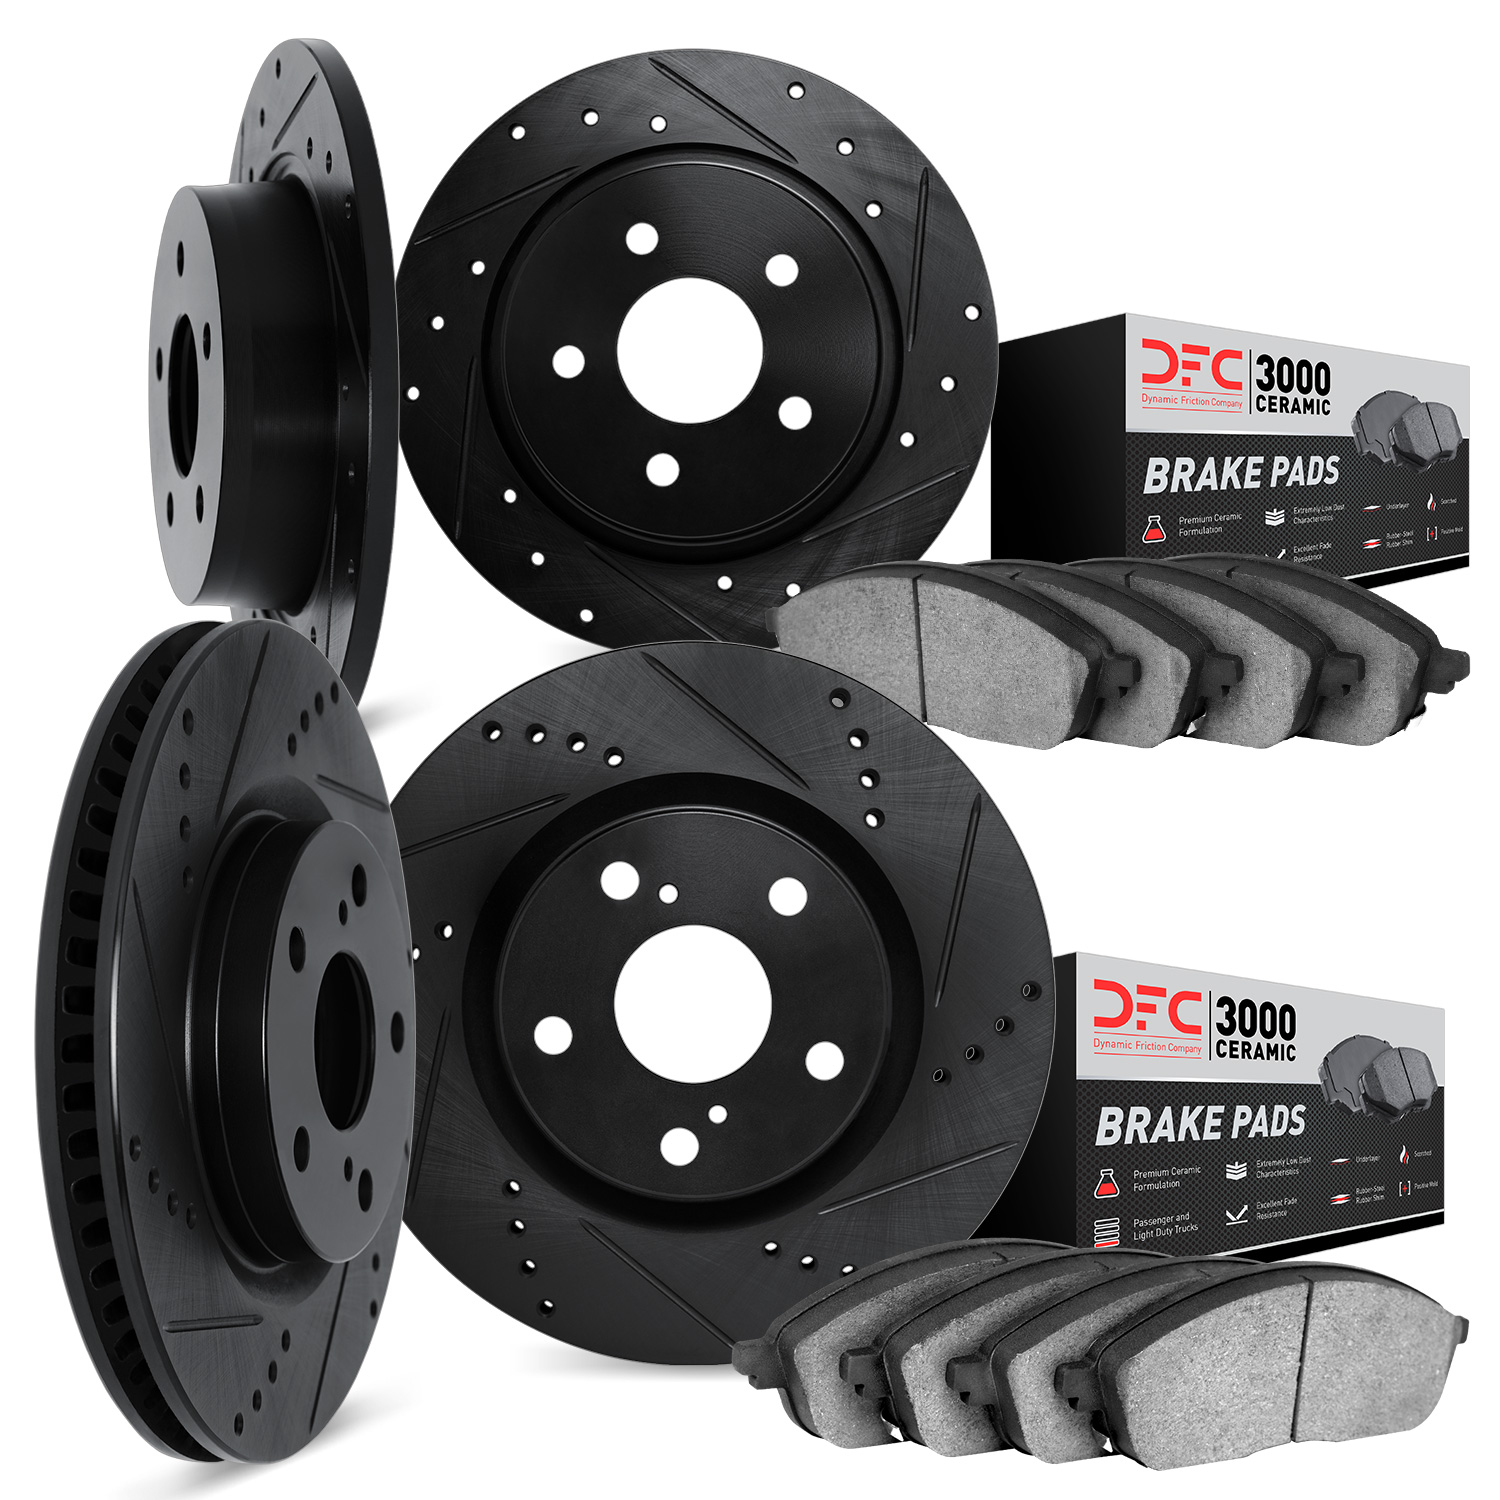 8304-01008 Drilled/Slotted Brake Rotors with 3000-Series Ceramic Brake Pads Kit [Black], 2010-2013 Suzuki, Position: Front and R